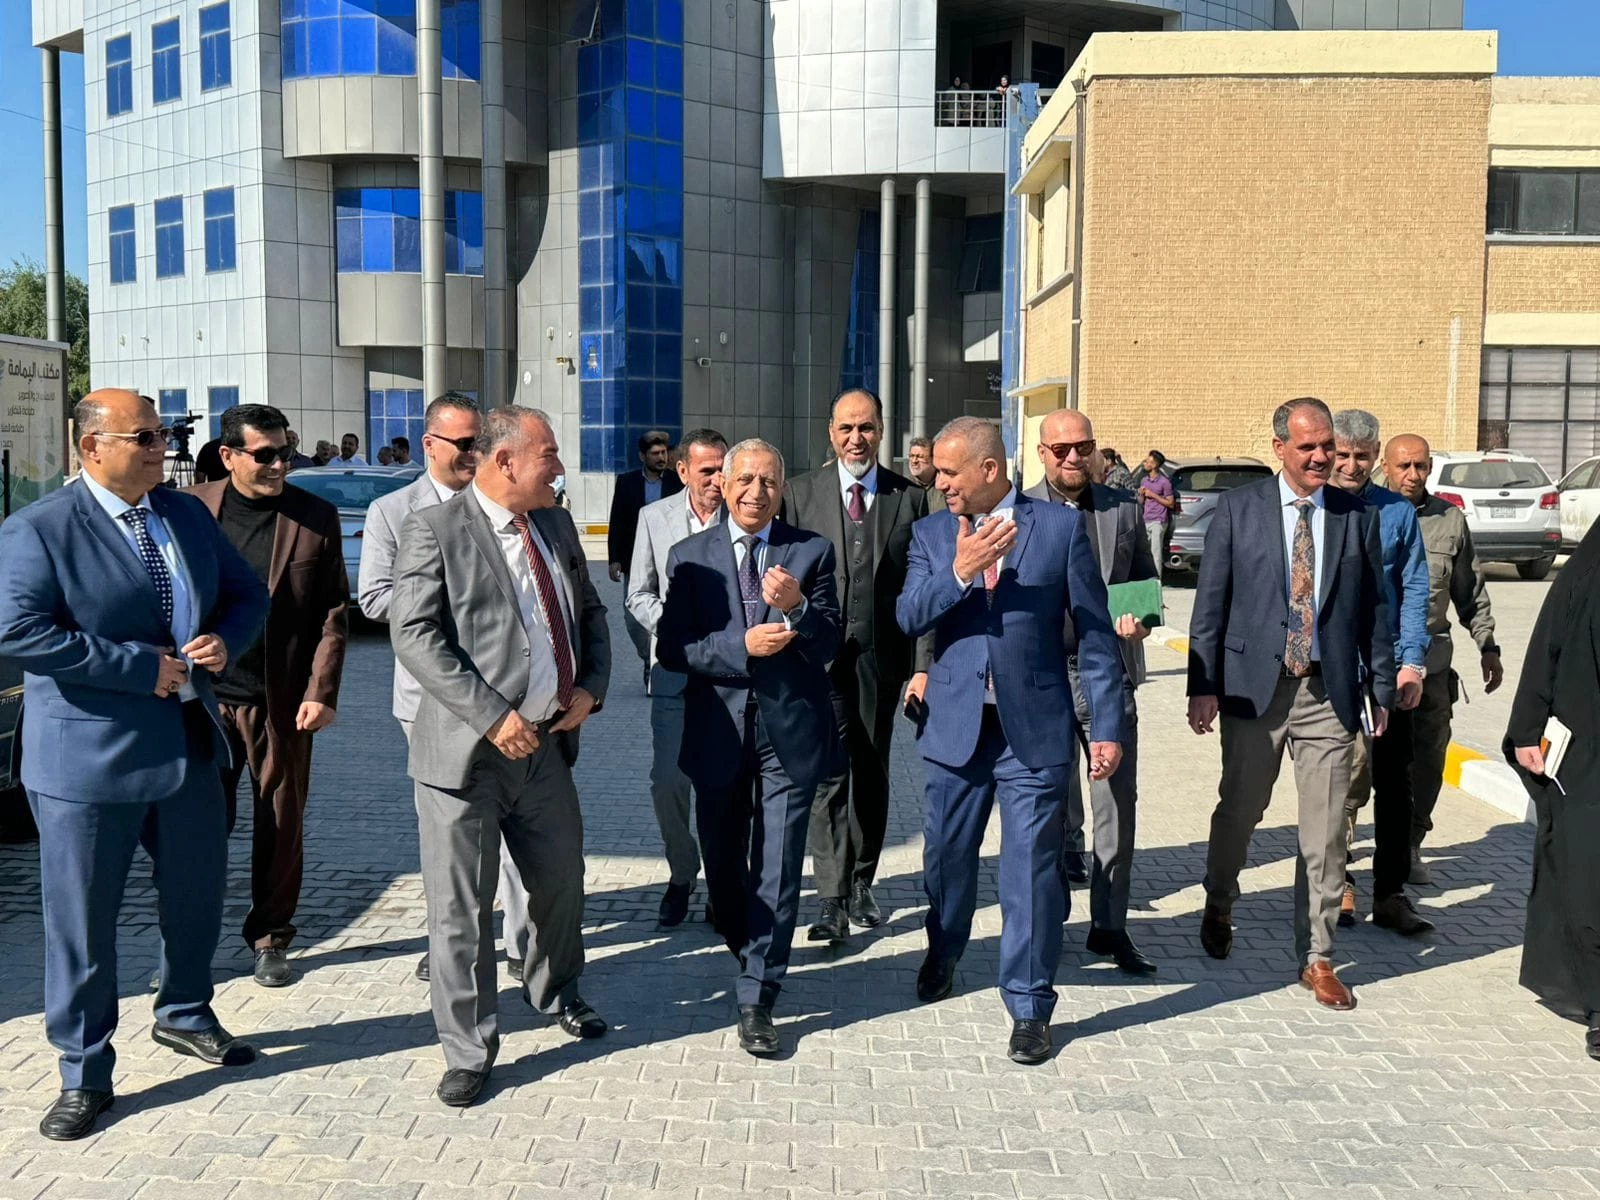 Meeting of the President of Arab Academy for Science, Technology & Maritime Transport  (AASTMT) and a Delegation from Port Training Institute (PTI) with the Iraqi Minister of Transport4